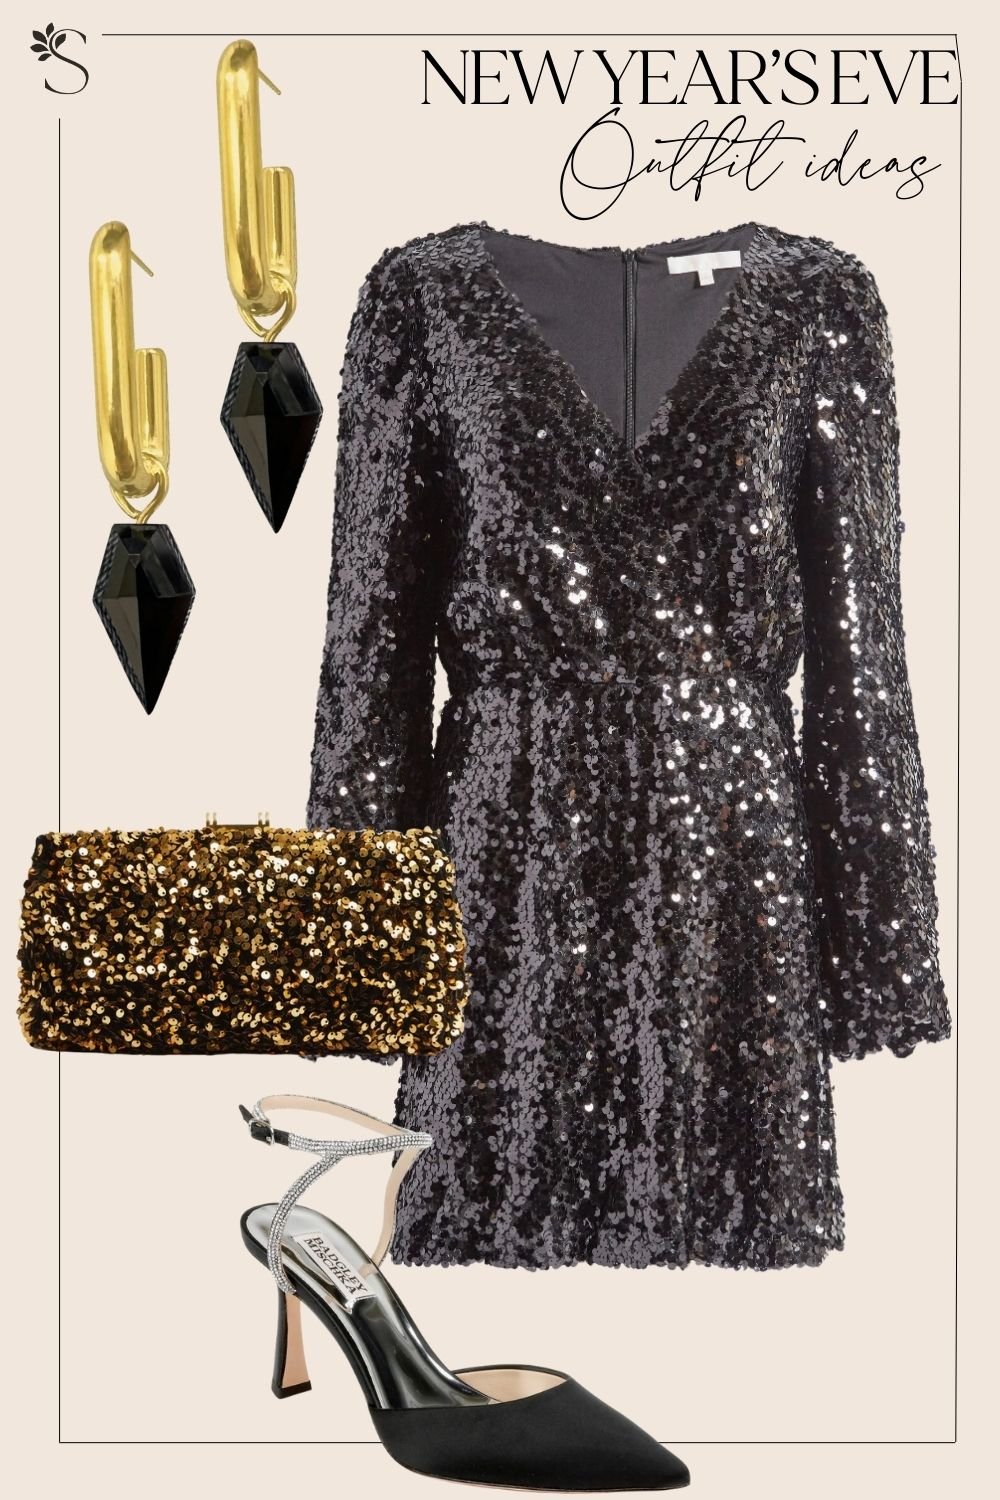 New Years Eve Outfit Ideas, NYE Essentials